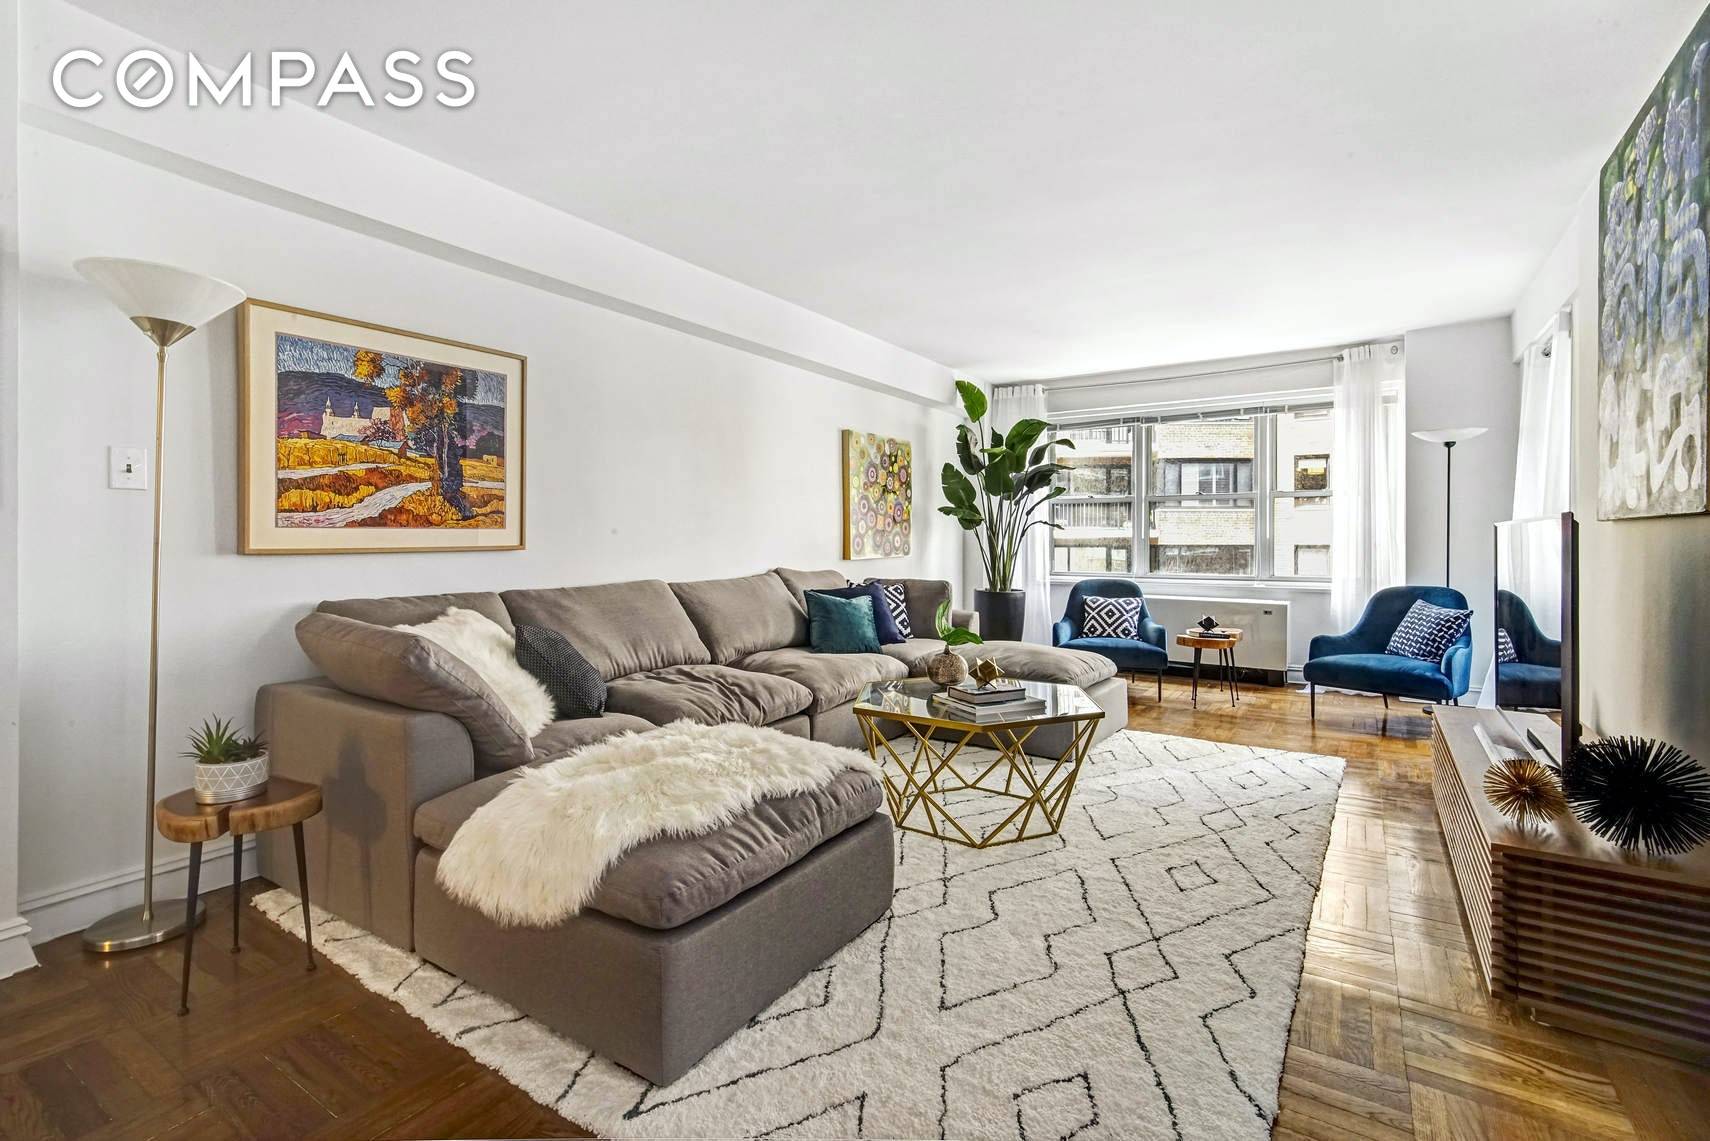 REDUCED TO SELL ! OFFERED AT 999, 000 Welcome to the gorgeous 2 bedroom 2 bath gem in Sutton Place South.